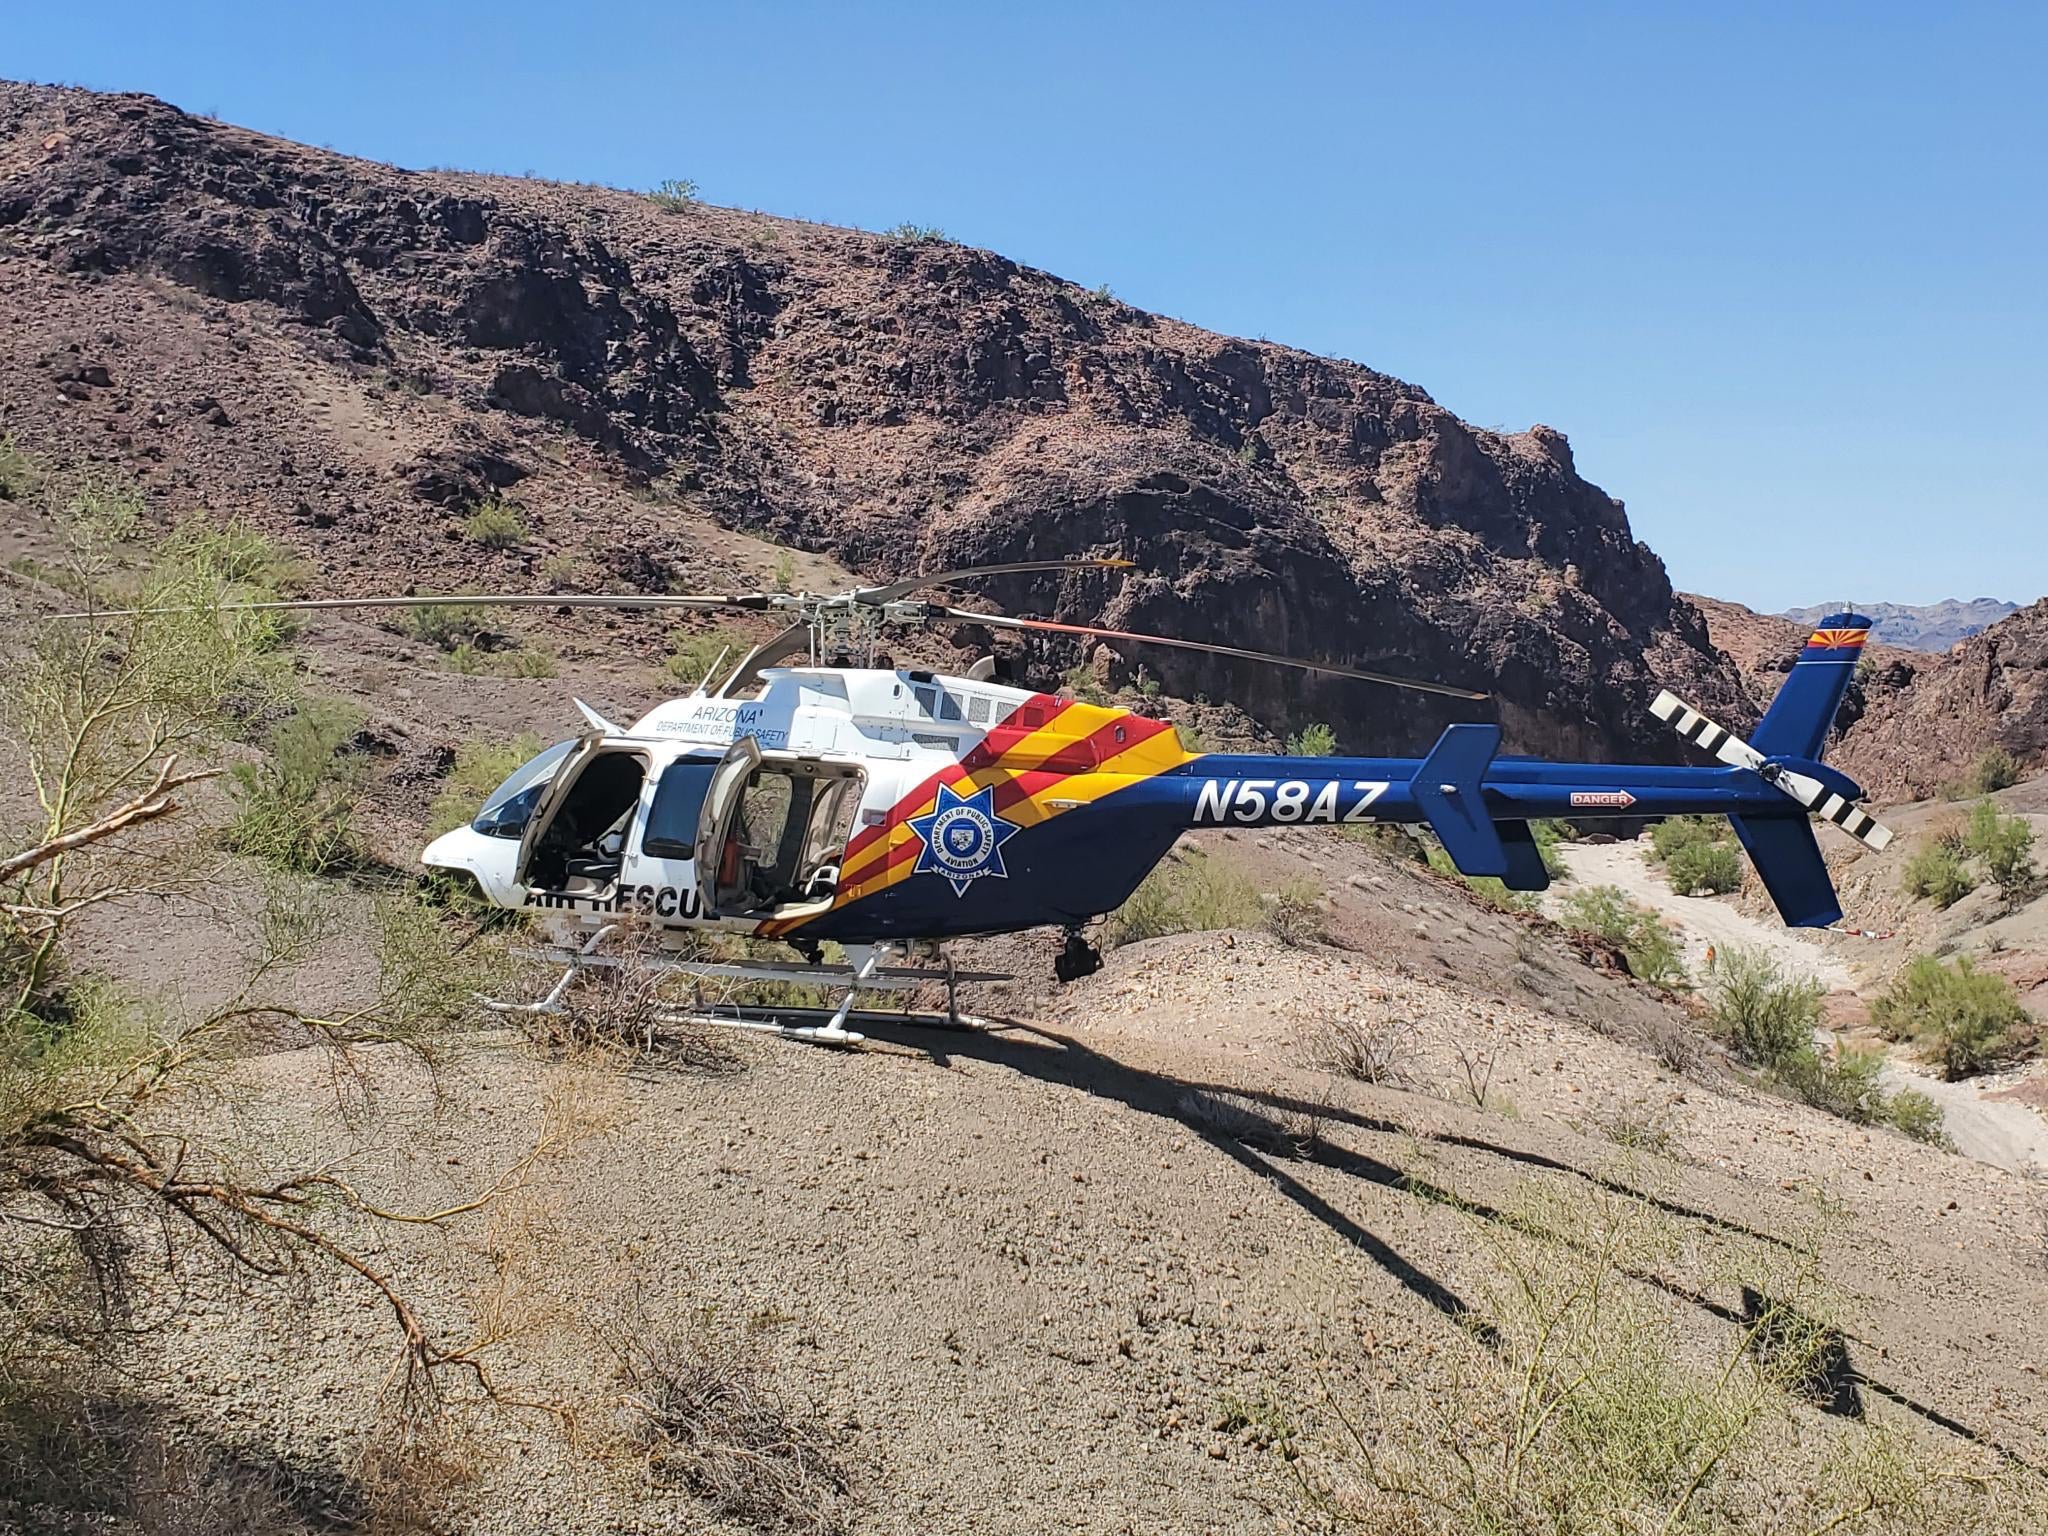 A helicopter involved in the search for hikers near Lake Havasu City. A man in Laguna Niguel, California is in custody after attempting to shoot at an Orange County Sheriff’s Department helicopter